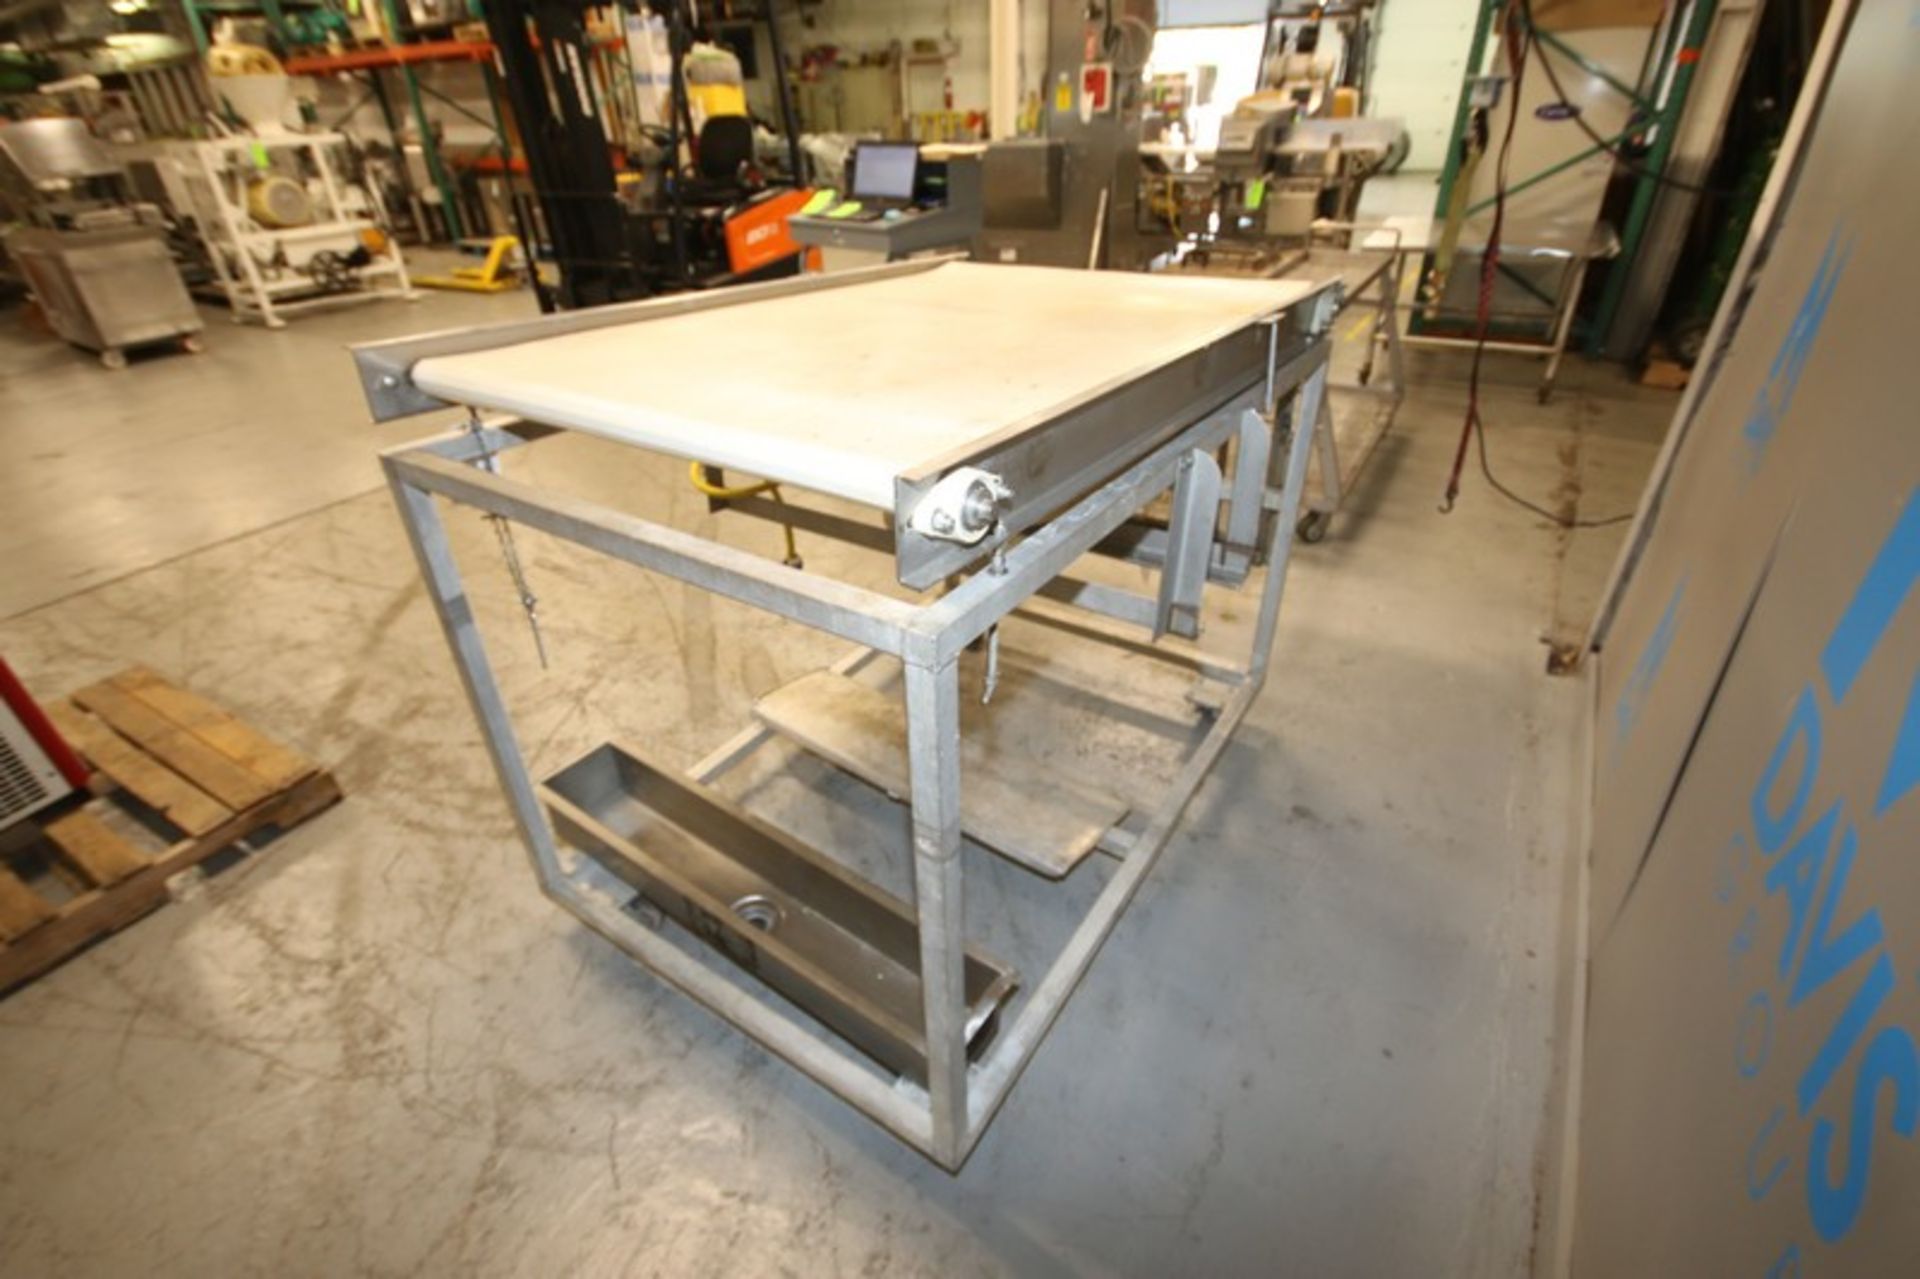 S/S Transfer Conveyor, with Conveyor Belt Aprox. 58" L x 36" W Plastic Belt, with S/S Mesh Infeed, - Image 4 of 7